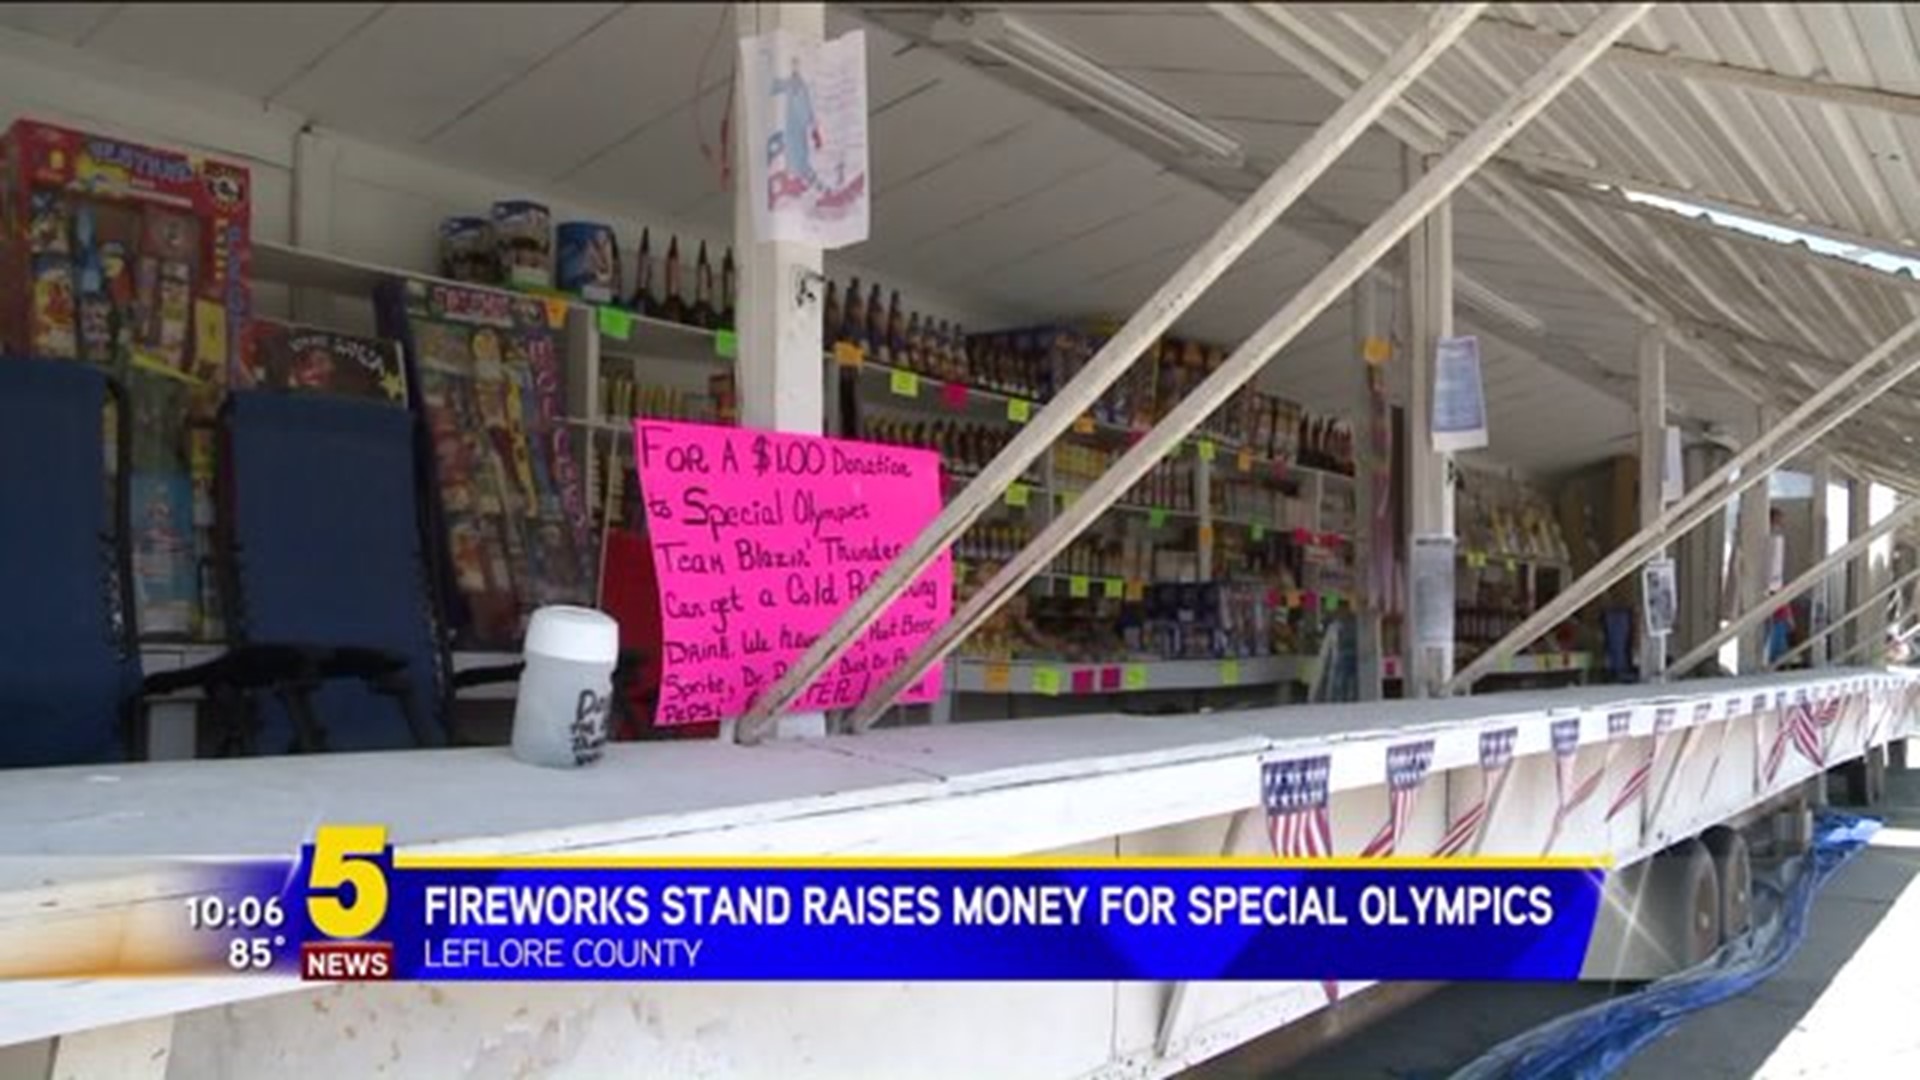 Fireworks Stand Raises Money For Special Olympics